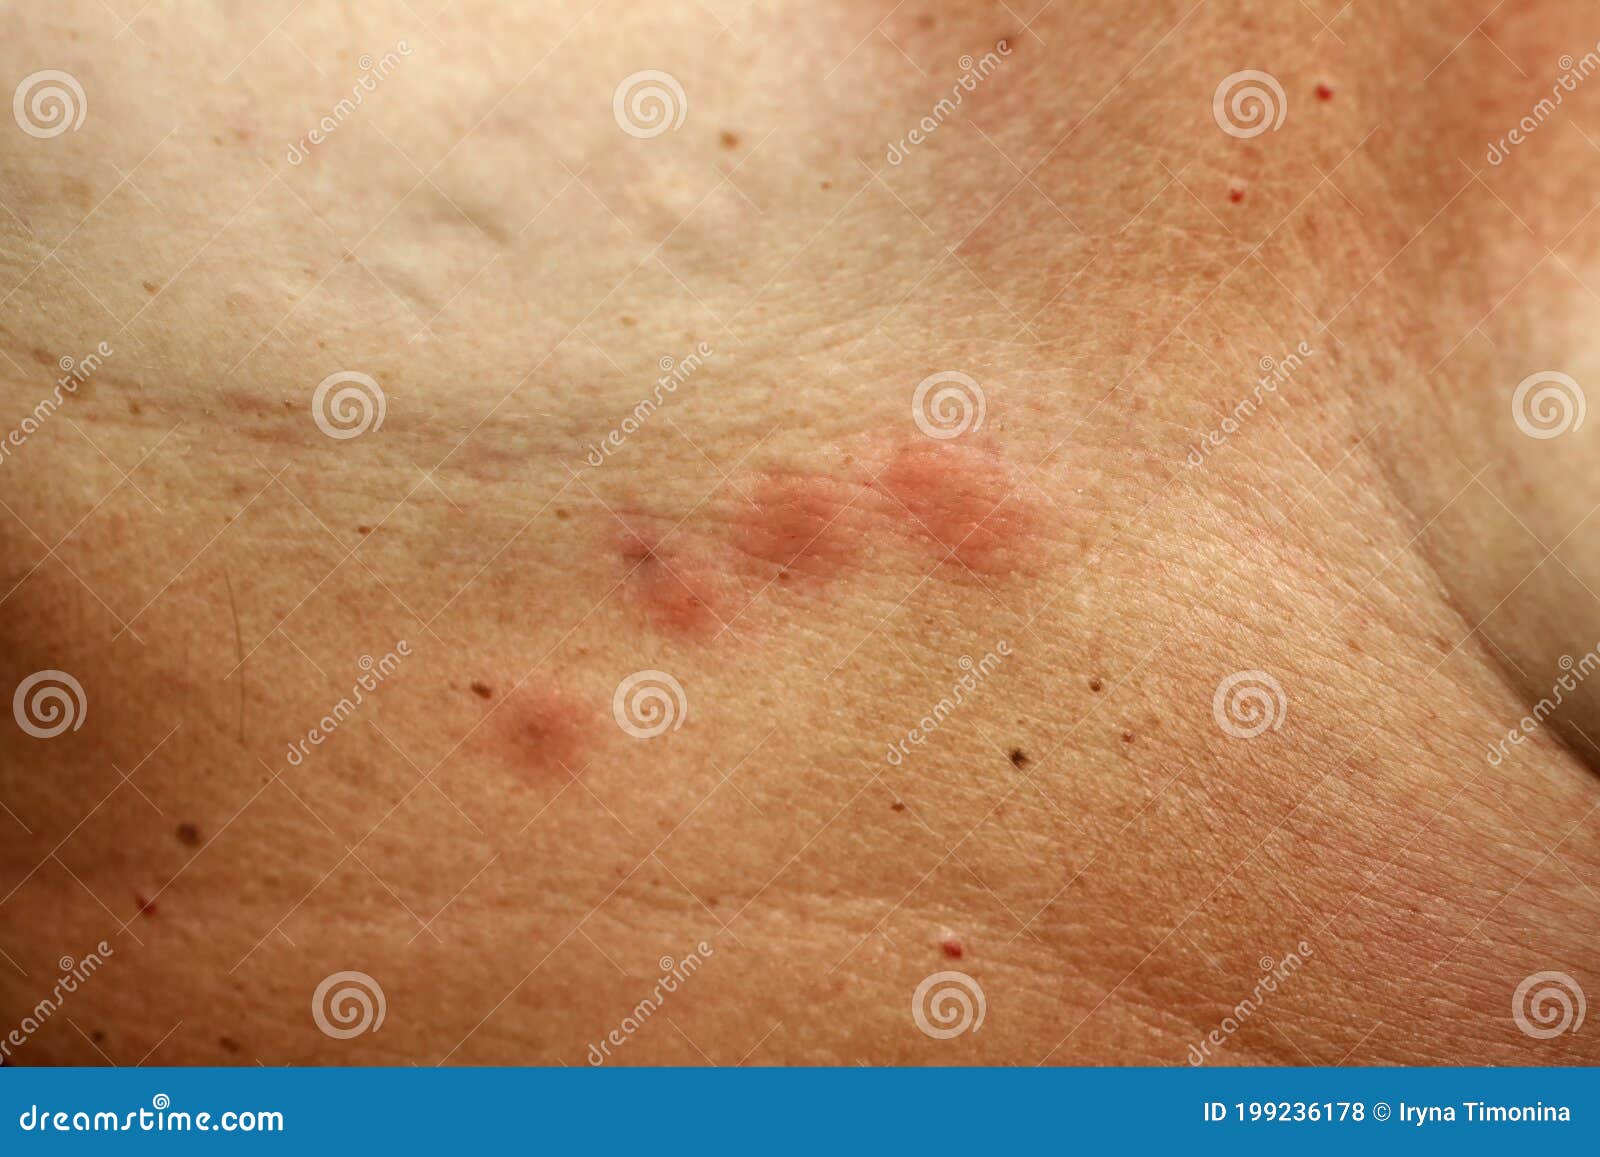 Mosquito Bites on the Skin Under the Breast Stock Photo - Image of female,  health: 199236178